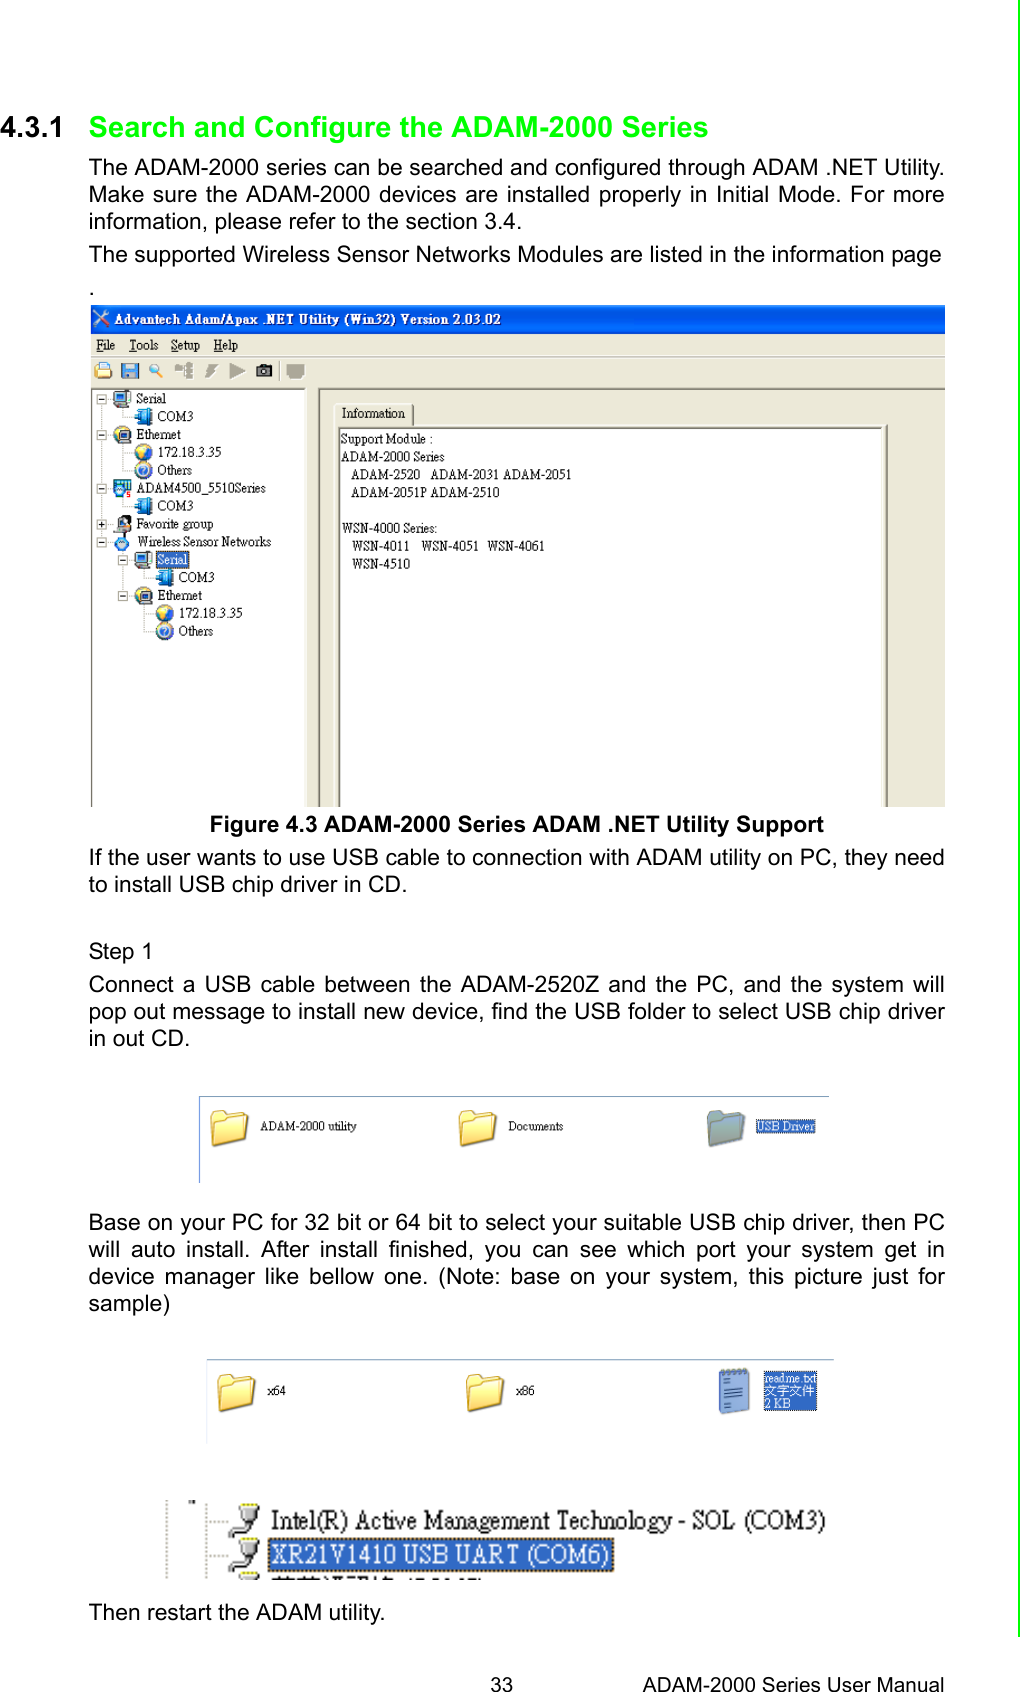 33 ADAM-2000 Series User ManualChapter 4 Software Configuration Guide4.3.1 Search and Configure the ADAM-2000 SeriesThe ADAM-2000 series can be searched and configured through ADAM .NET Utility.Make sure the ADAM-2000 devices are installed properly in Initial Mode. For moreinformation, please refer to the section 3.4.The supported Wireless Sensor Networks Modules are listed in the information page.Figure 4.3 ADAM-2000 Series ADAM .NET Utility SupportIf the user wants to use USB cable to connection with ADAM utility on PC, they needto install USB chip driver in CD. Step 1Connect a USB cable between the ADAM-2520Z and the PC, and the system willpop out message to install new device, find the USB folder to select USB chip driverin out CD. Base on your PC for 32 bit or 64 bit to select your suitable USB chip driver, then PCwill auto install. After install finished, you can see which port your system get indevice manager like bellow one. (Note: base on your system, this picture just forsample)    Then restart the ADAM utility.